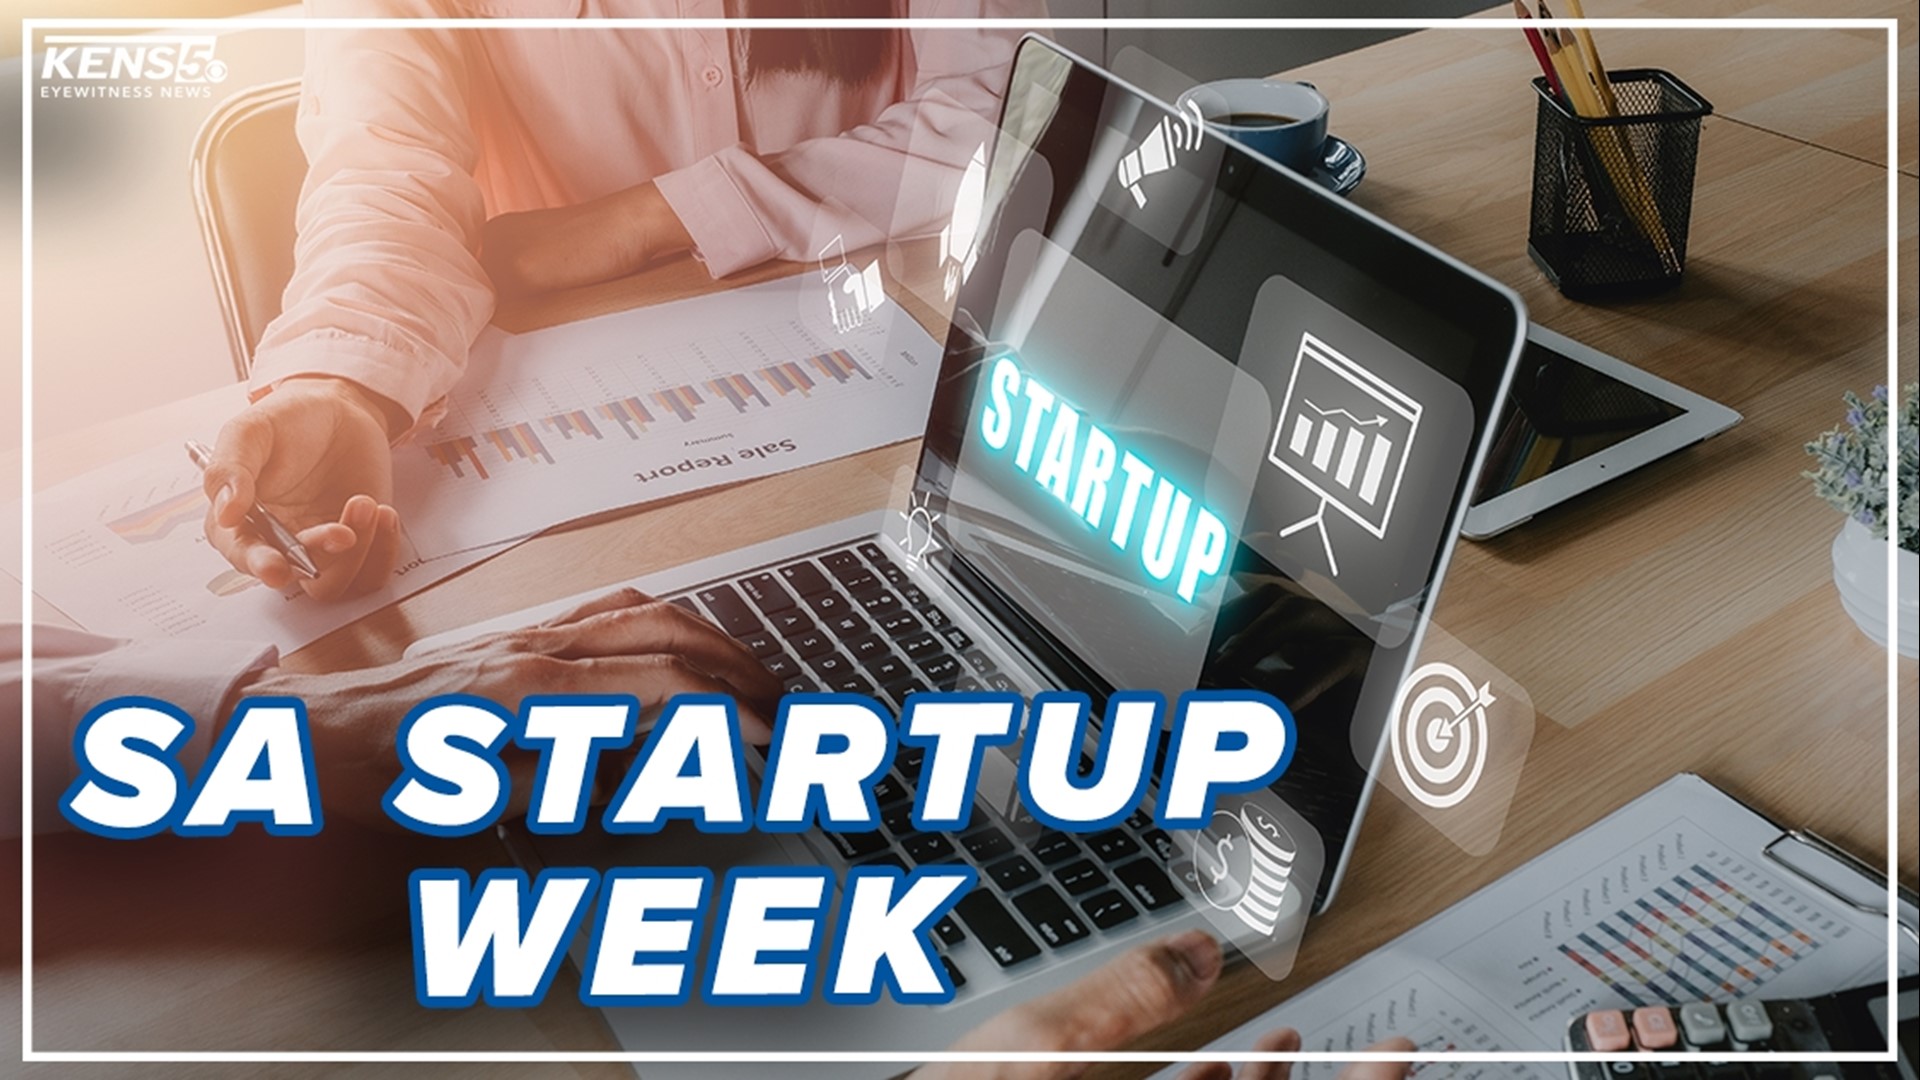 As efforts continue to make San Antonio a destination for startup companies, SA Startup Week is bringing together a full week of events to support entrepreneurs.